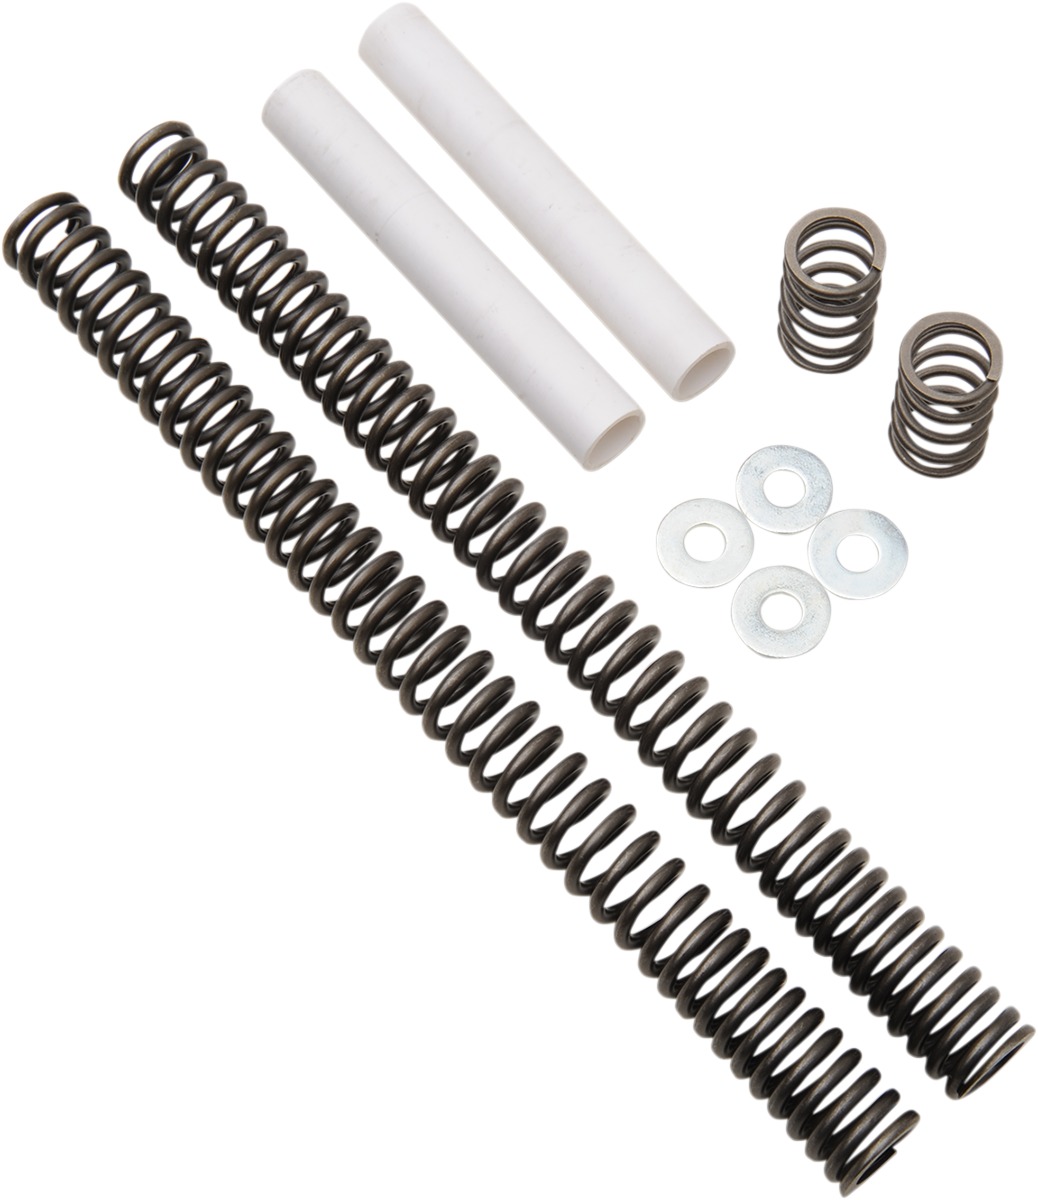 Fork Spring Lowering Kit - For 06-13 Electra/Street Glide, 99-13 Road Glide, 00-10 FXST - Click Image to Close